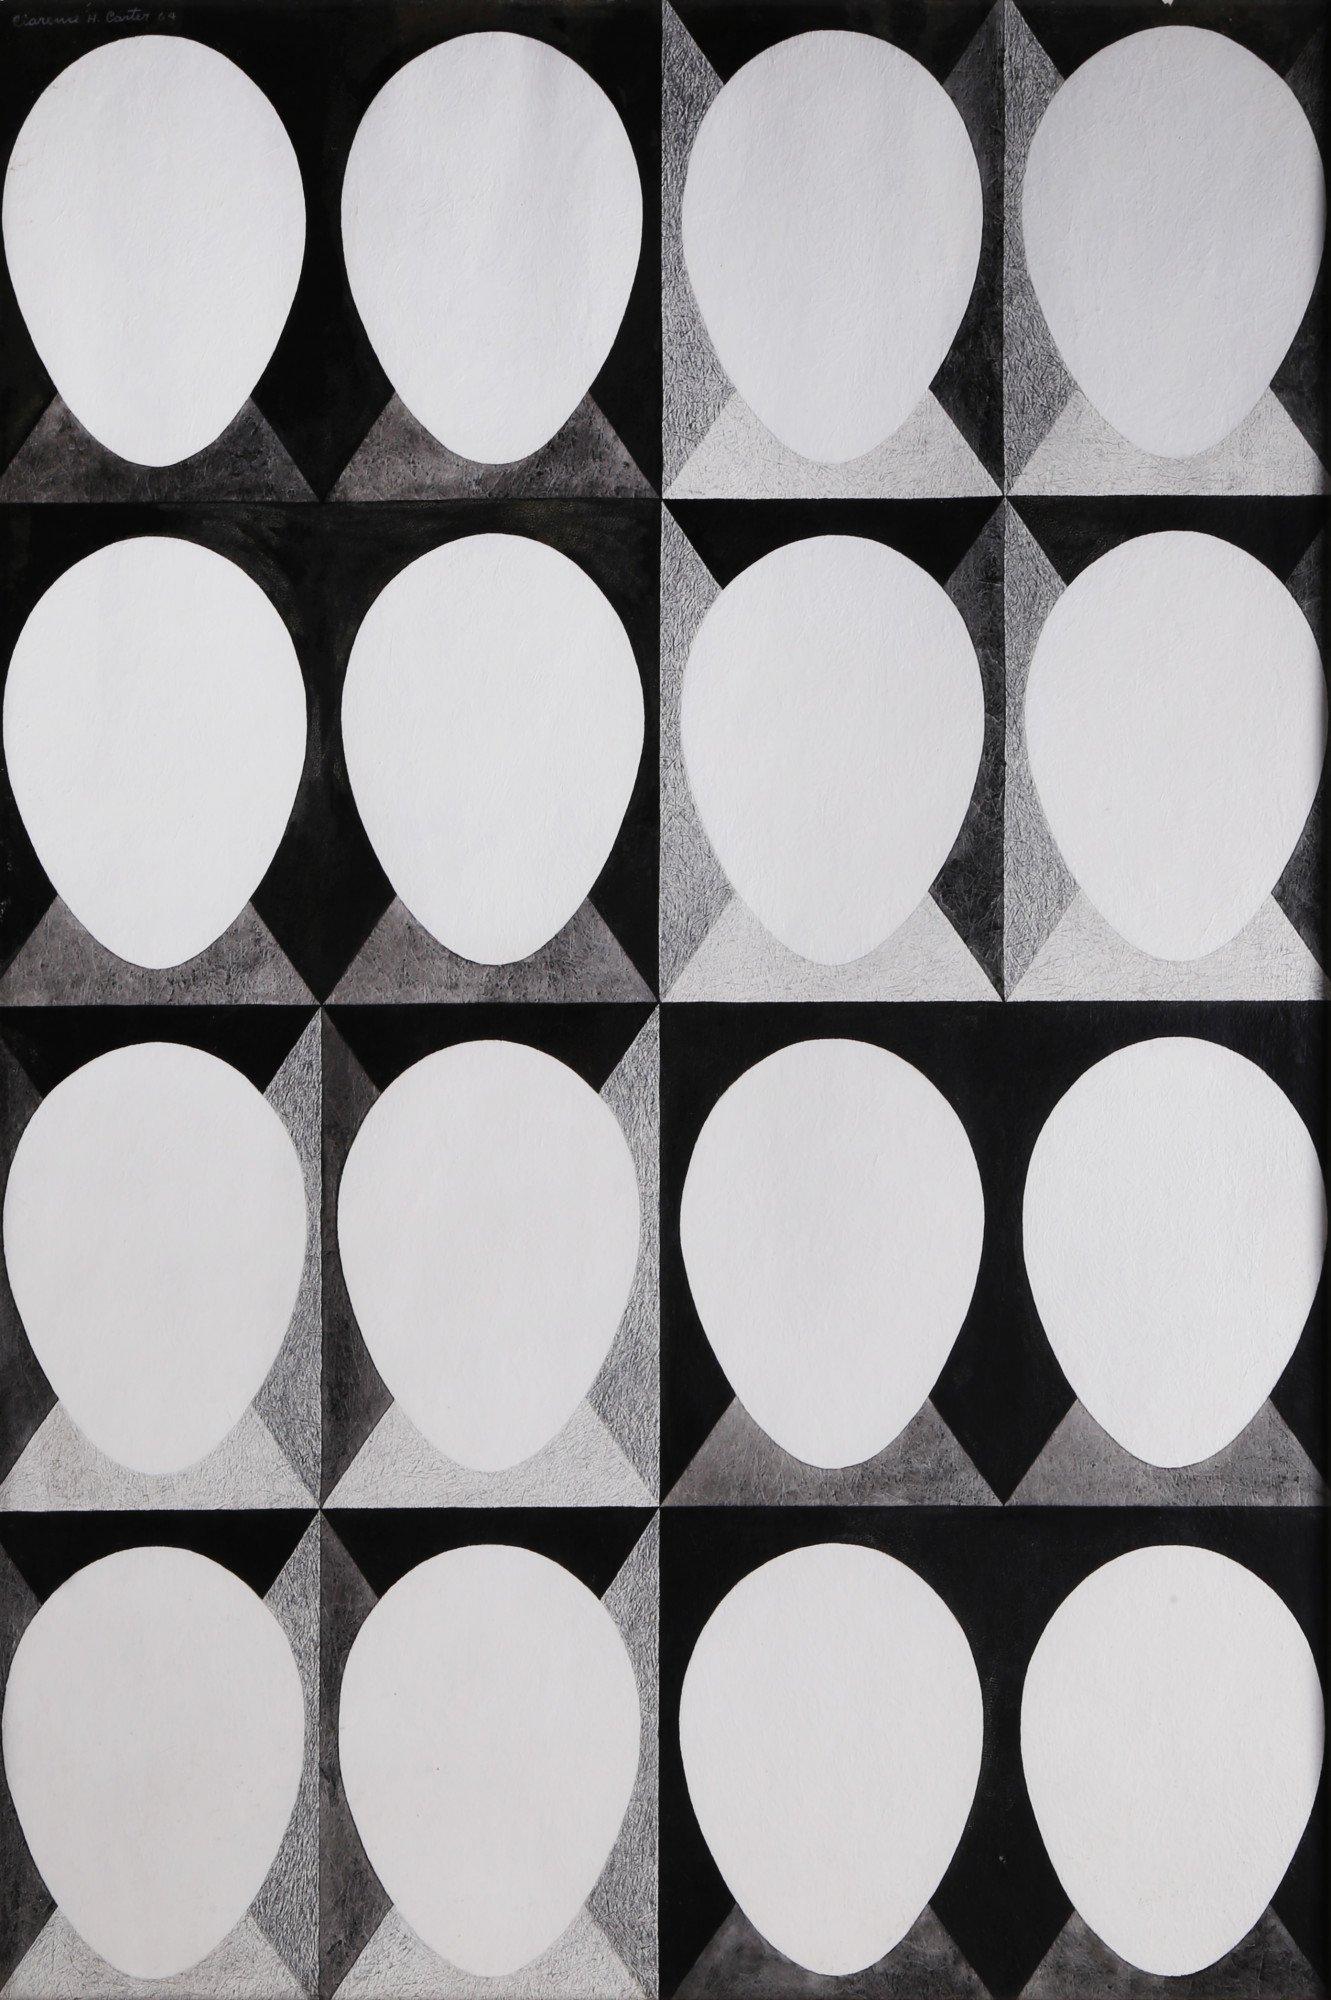 "People" - Mid-Century Ovoid Geometrical Abstract Black & White Drawing